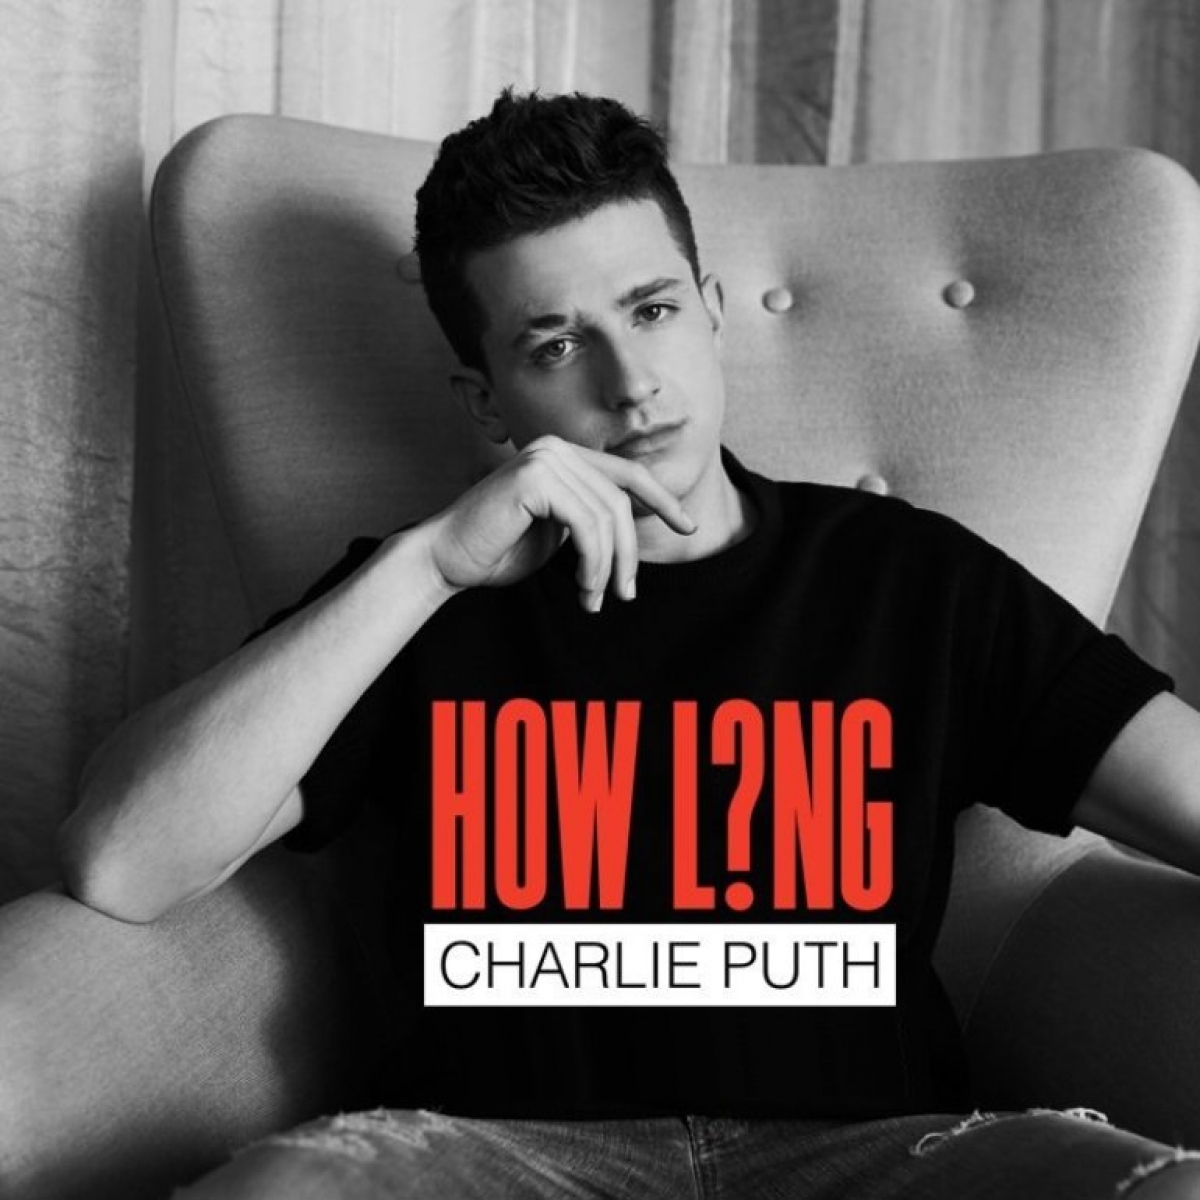 CHARLIE PUTH - How Long